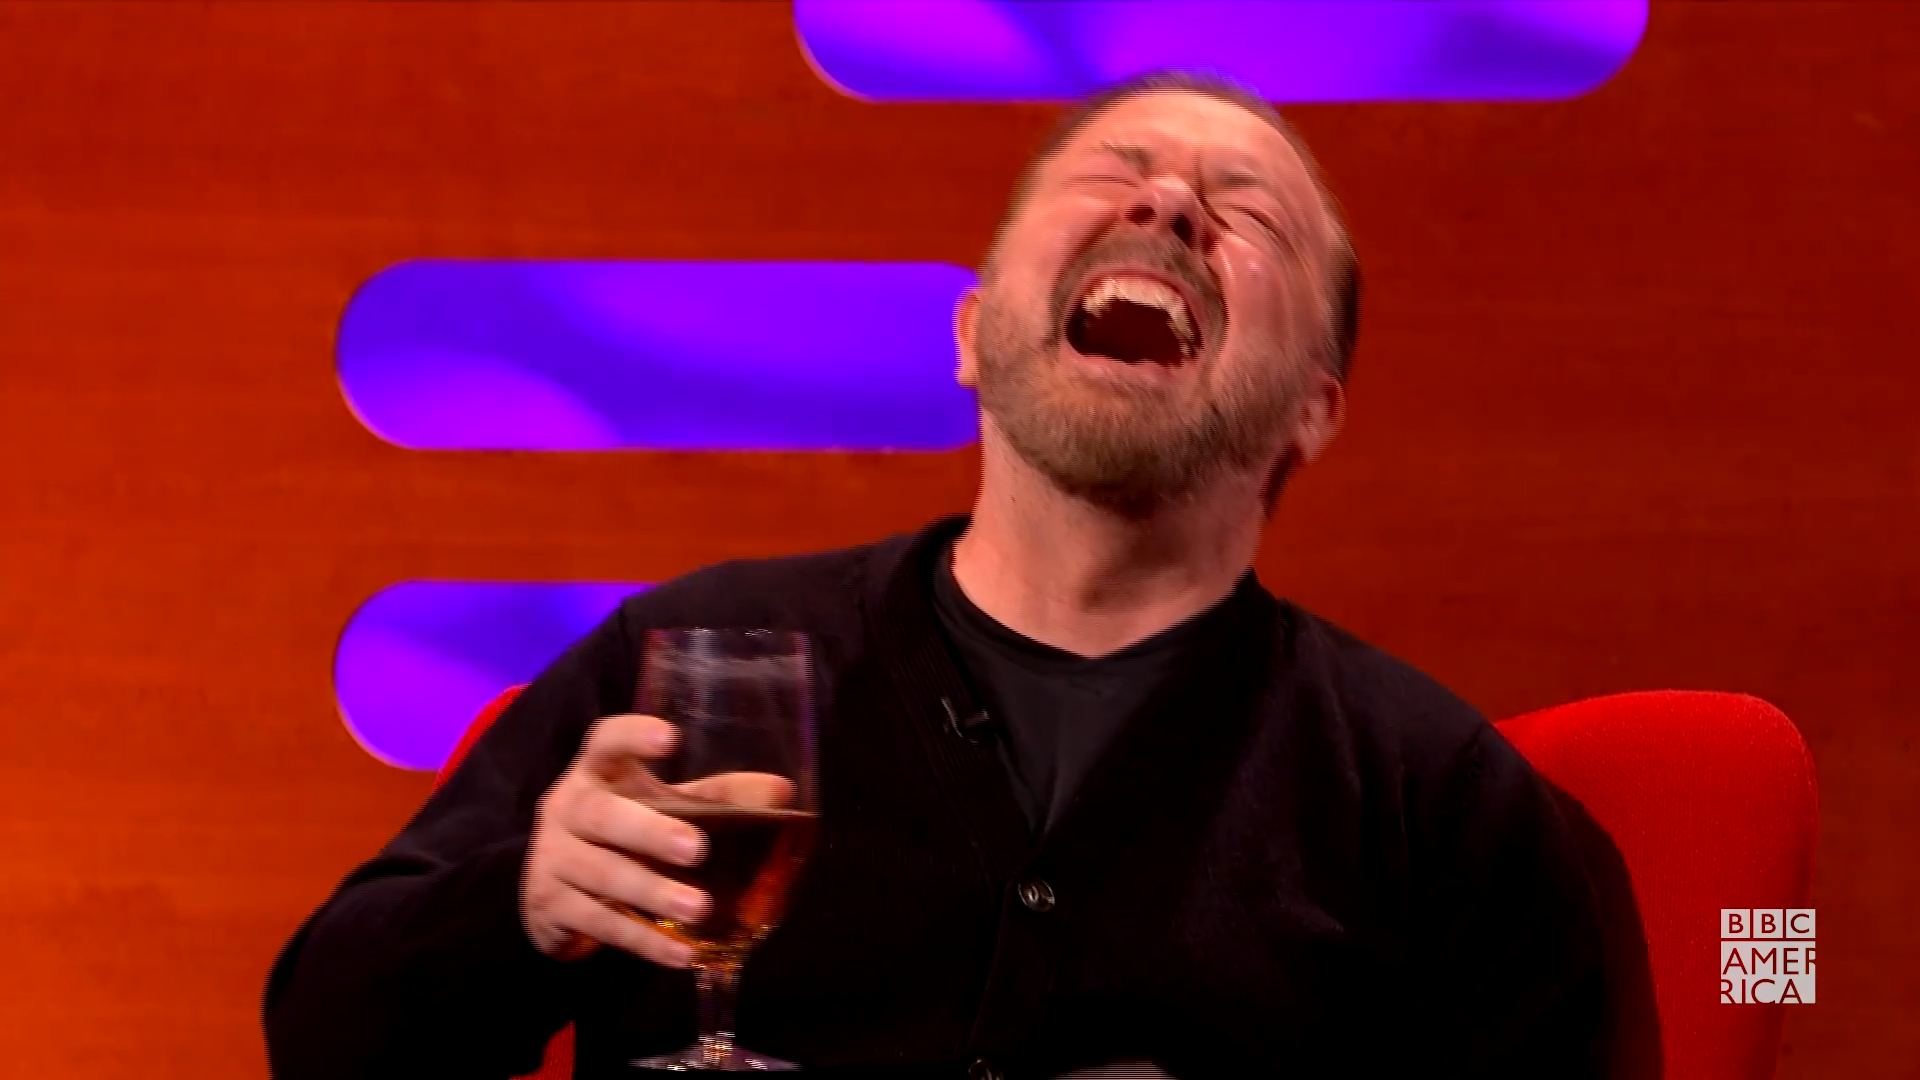 Watch Ricky Gervais on His Epic Golden Globe Roasts | The Graham Norton Show Video Extras